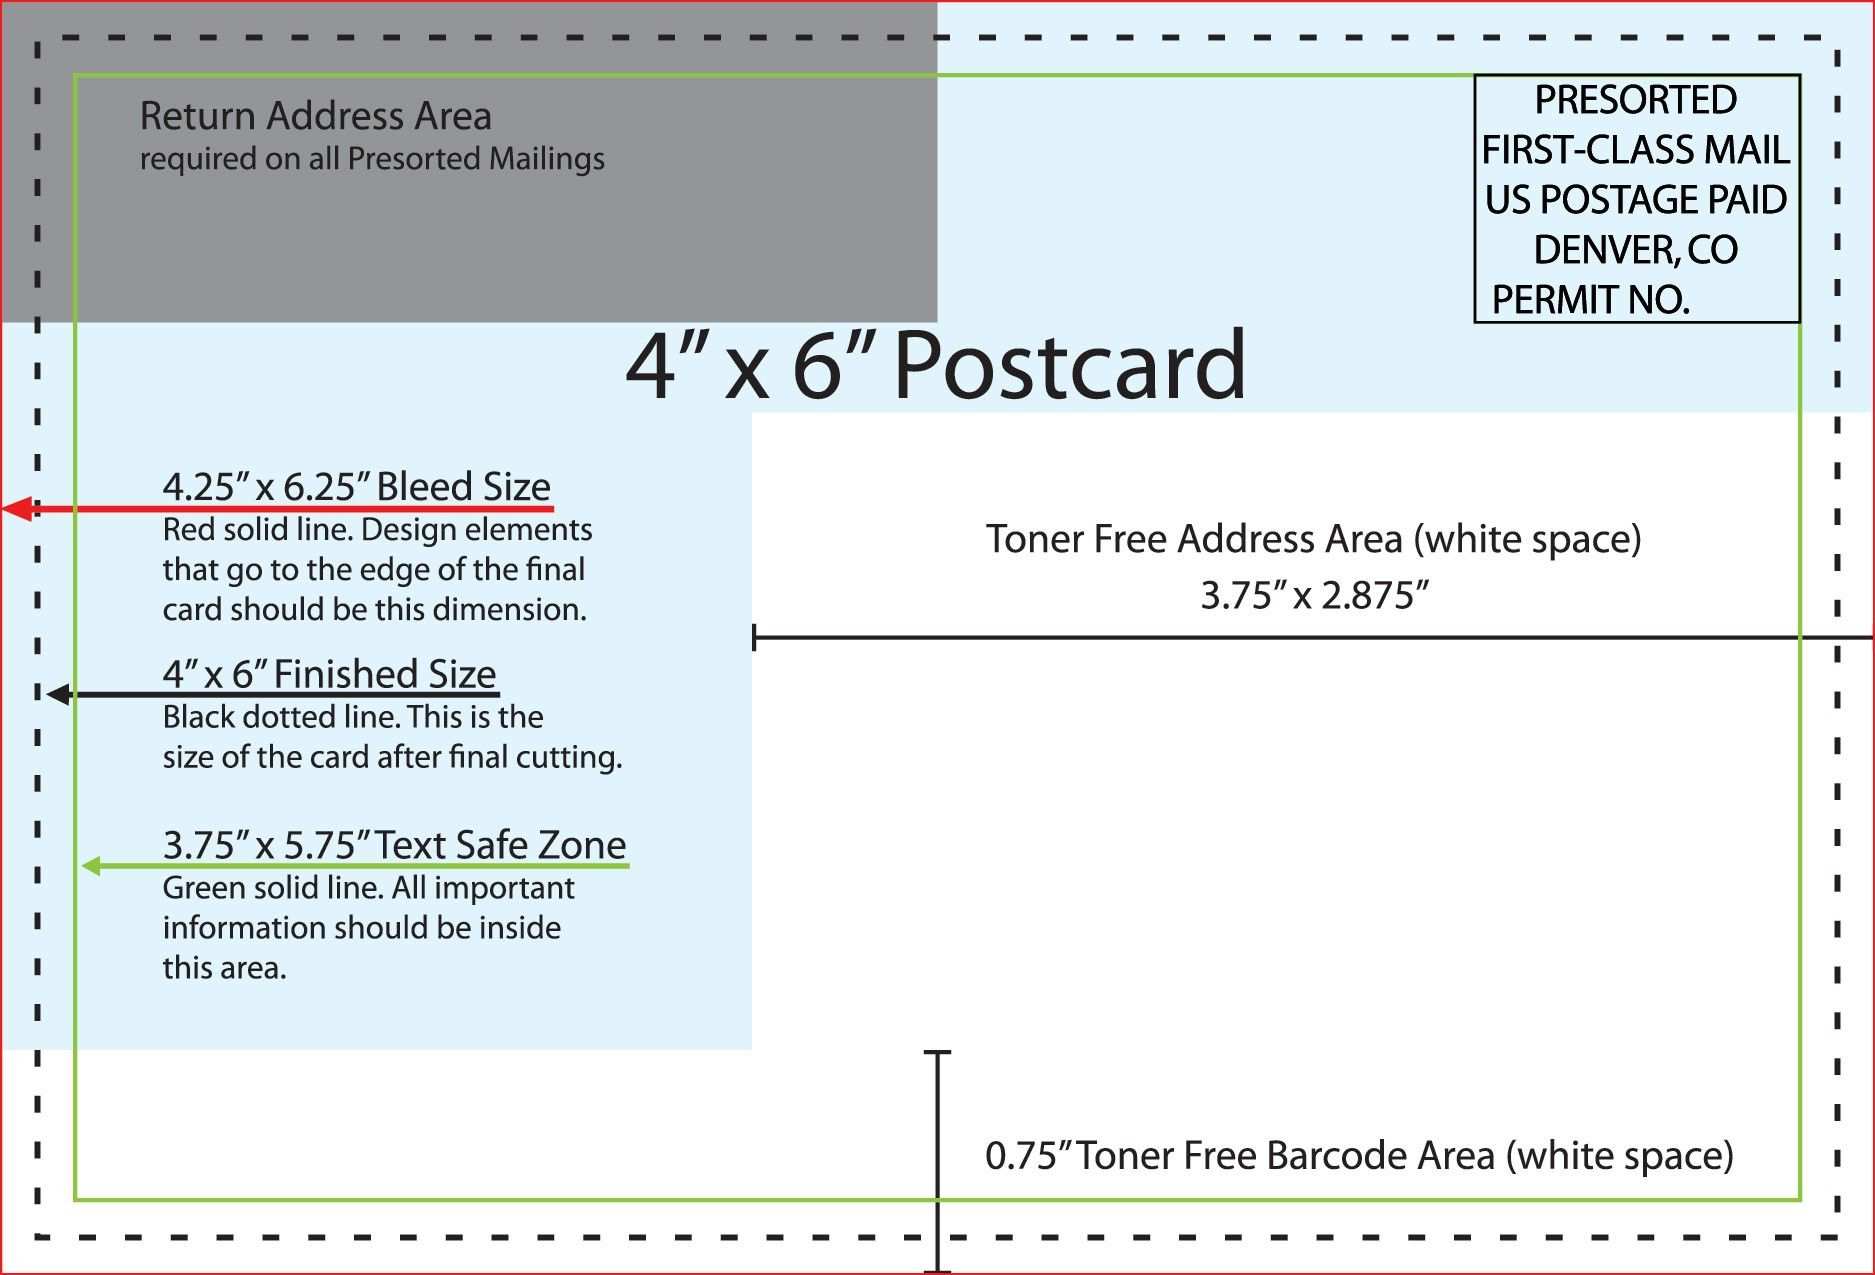 20-the-best-usps-postcard-guidelines-4x6-now-with-usps-postcard-guidelines-4x6-cards-design